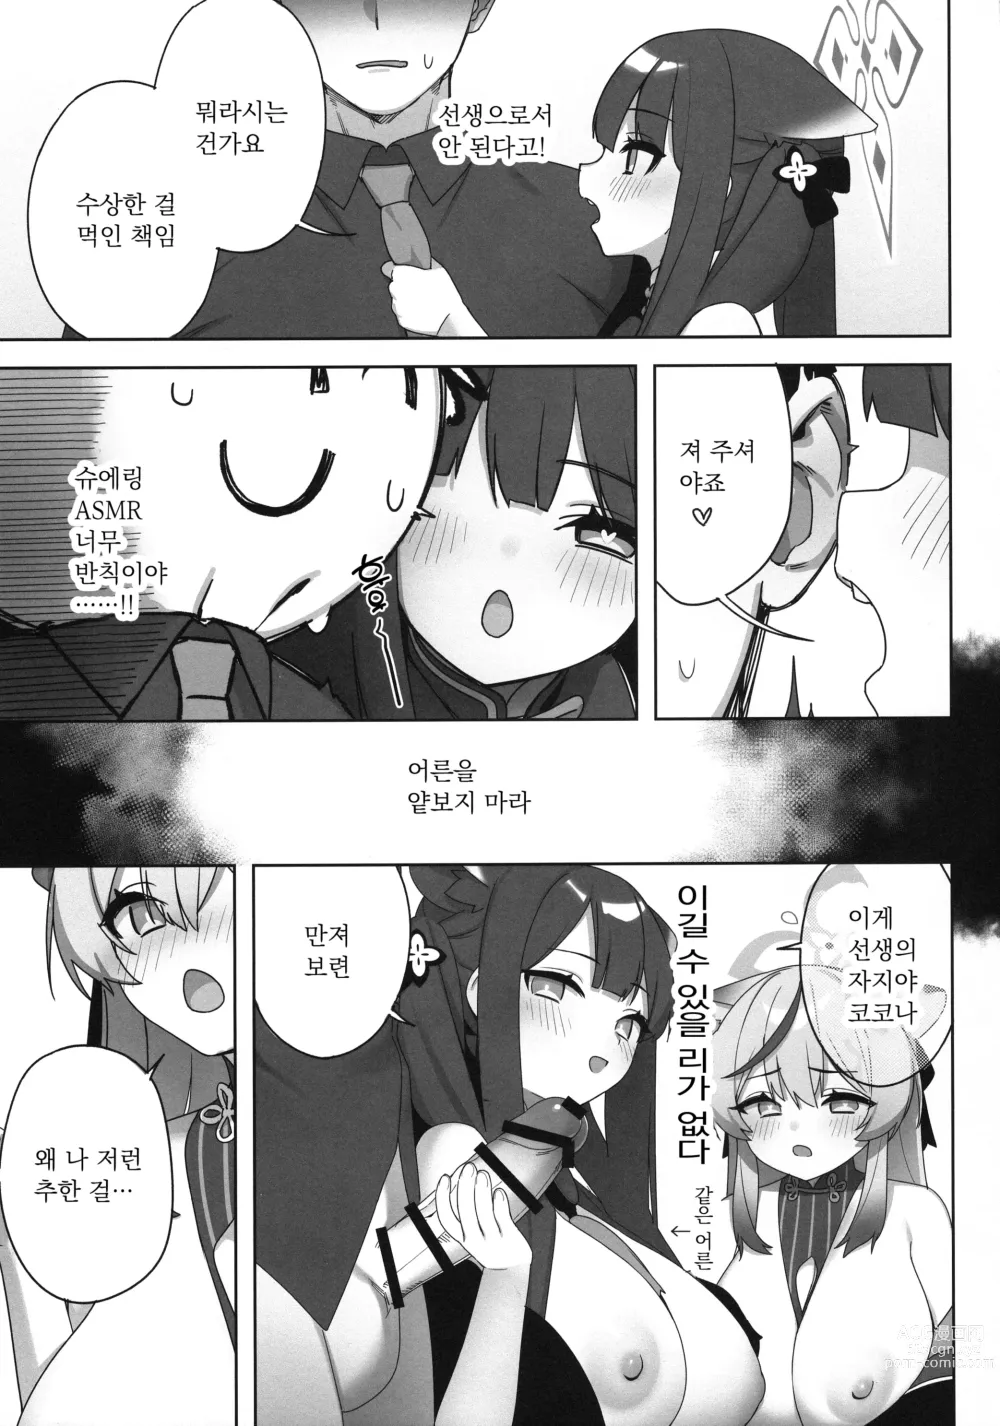 Page 6 of doujinshi Shuekoko Expansion - Live for oppai loli, Die for oppai loli